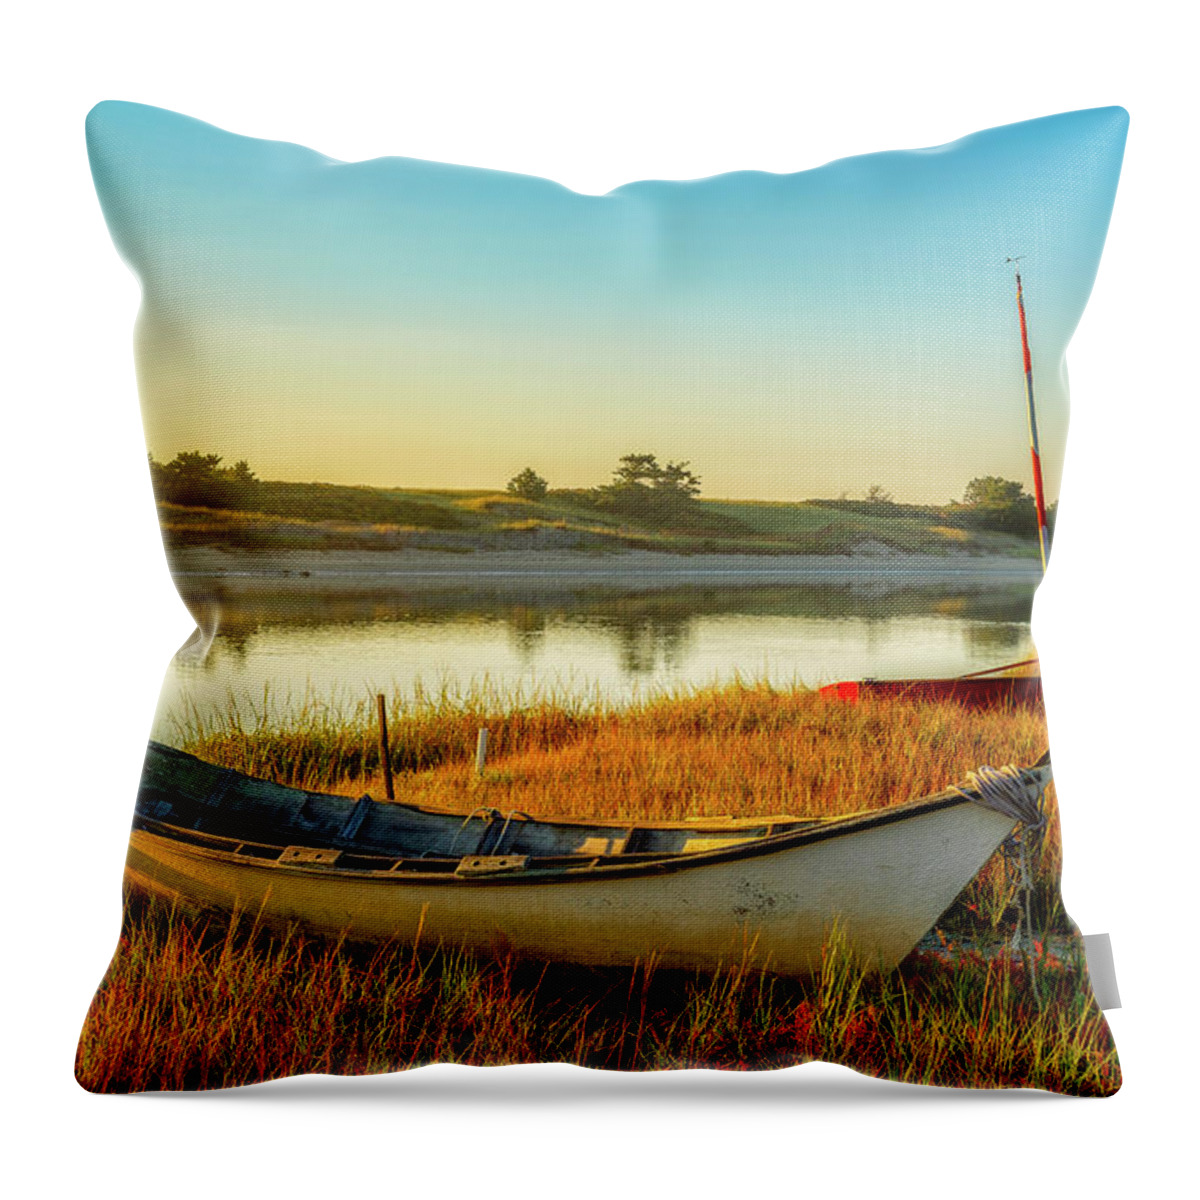 Abandoned Throw Pillow featuring the photograph Boats In The Marsh Grass, Ogunquit River by Jeff Sinon